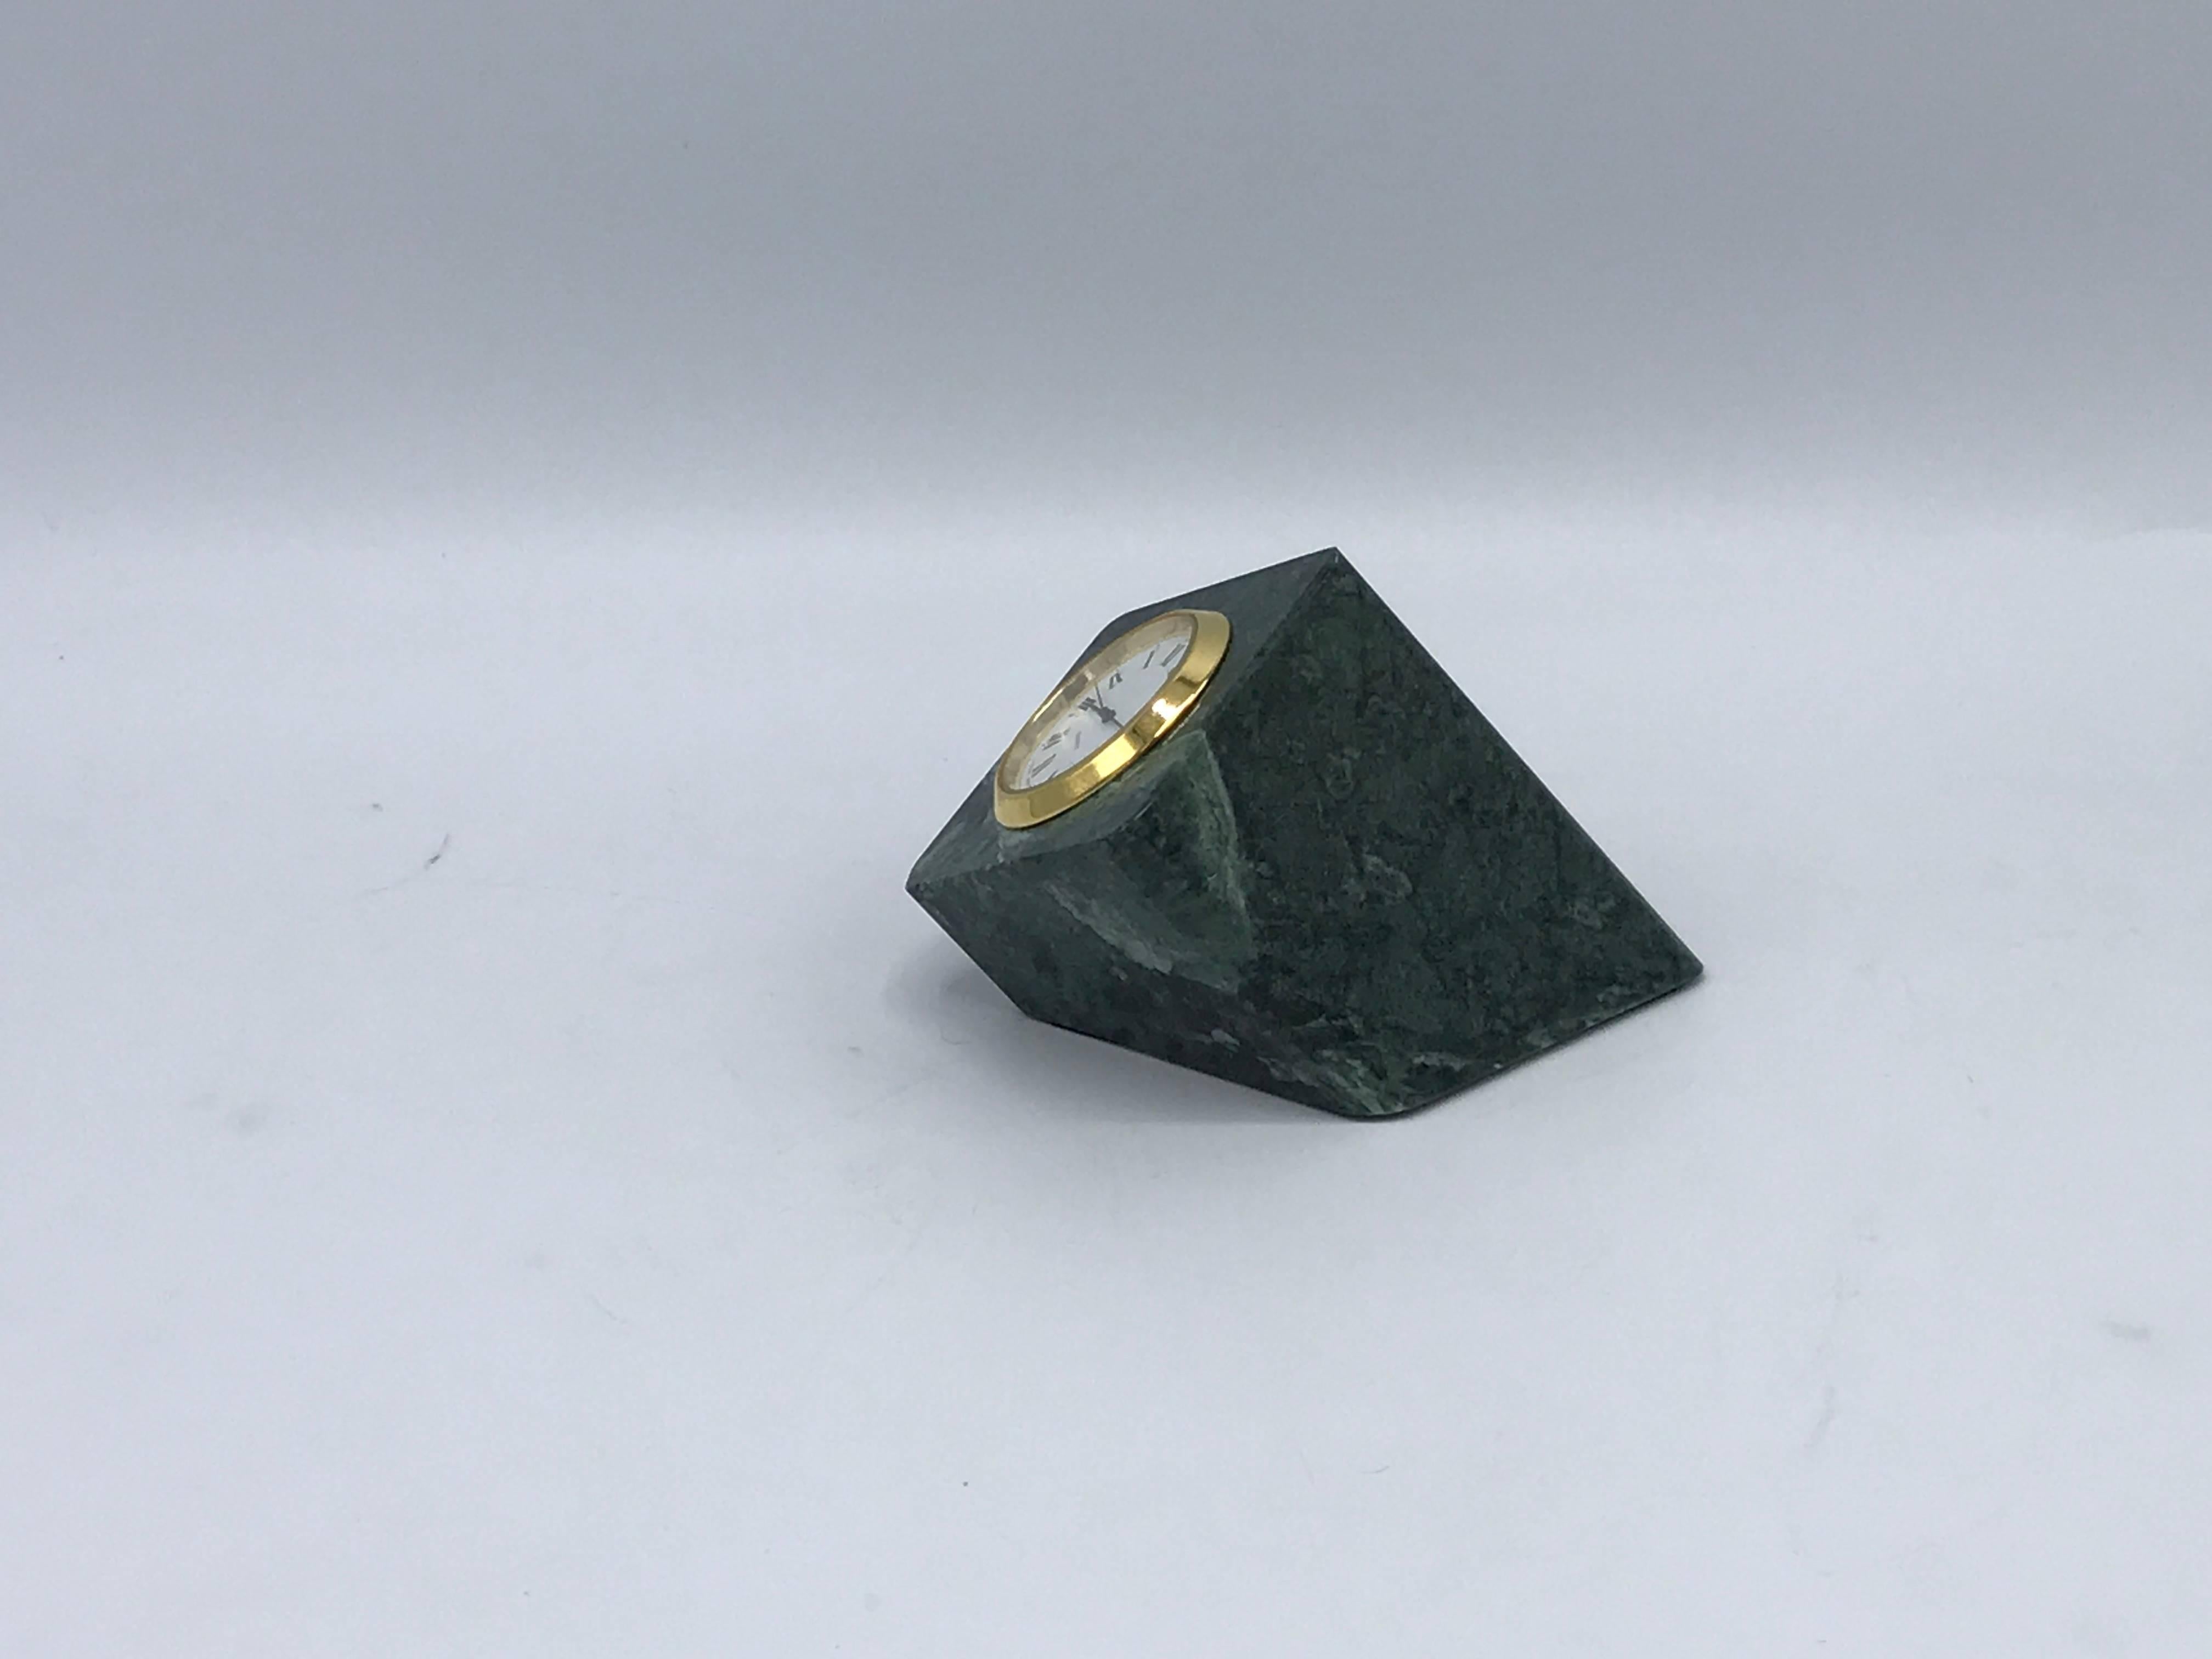 Offered is a beautiful, 1960s geometric green marble and brass desk clock.